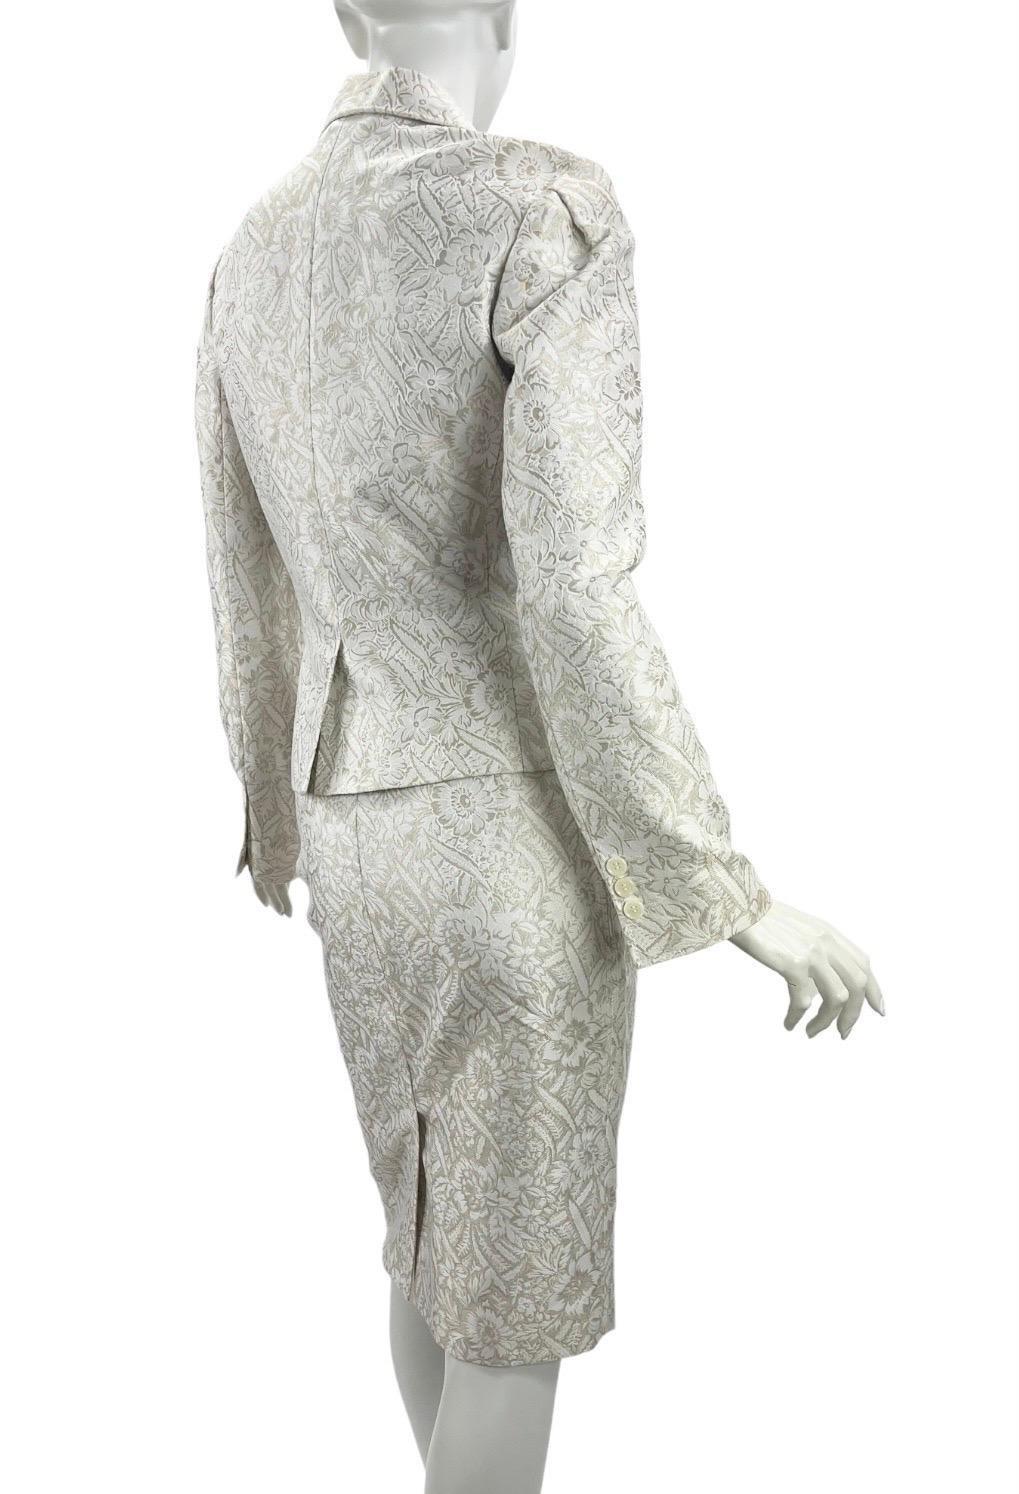 Early 2000-s Vintage Dolce & Gabbana White Gold Floral Jacquard Skirt Suit   For Sale 3